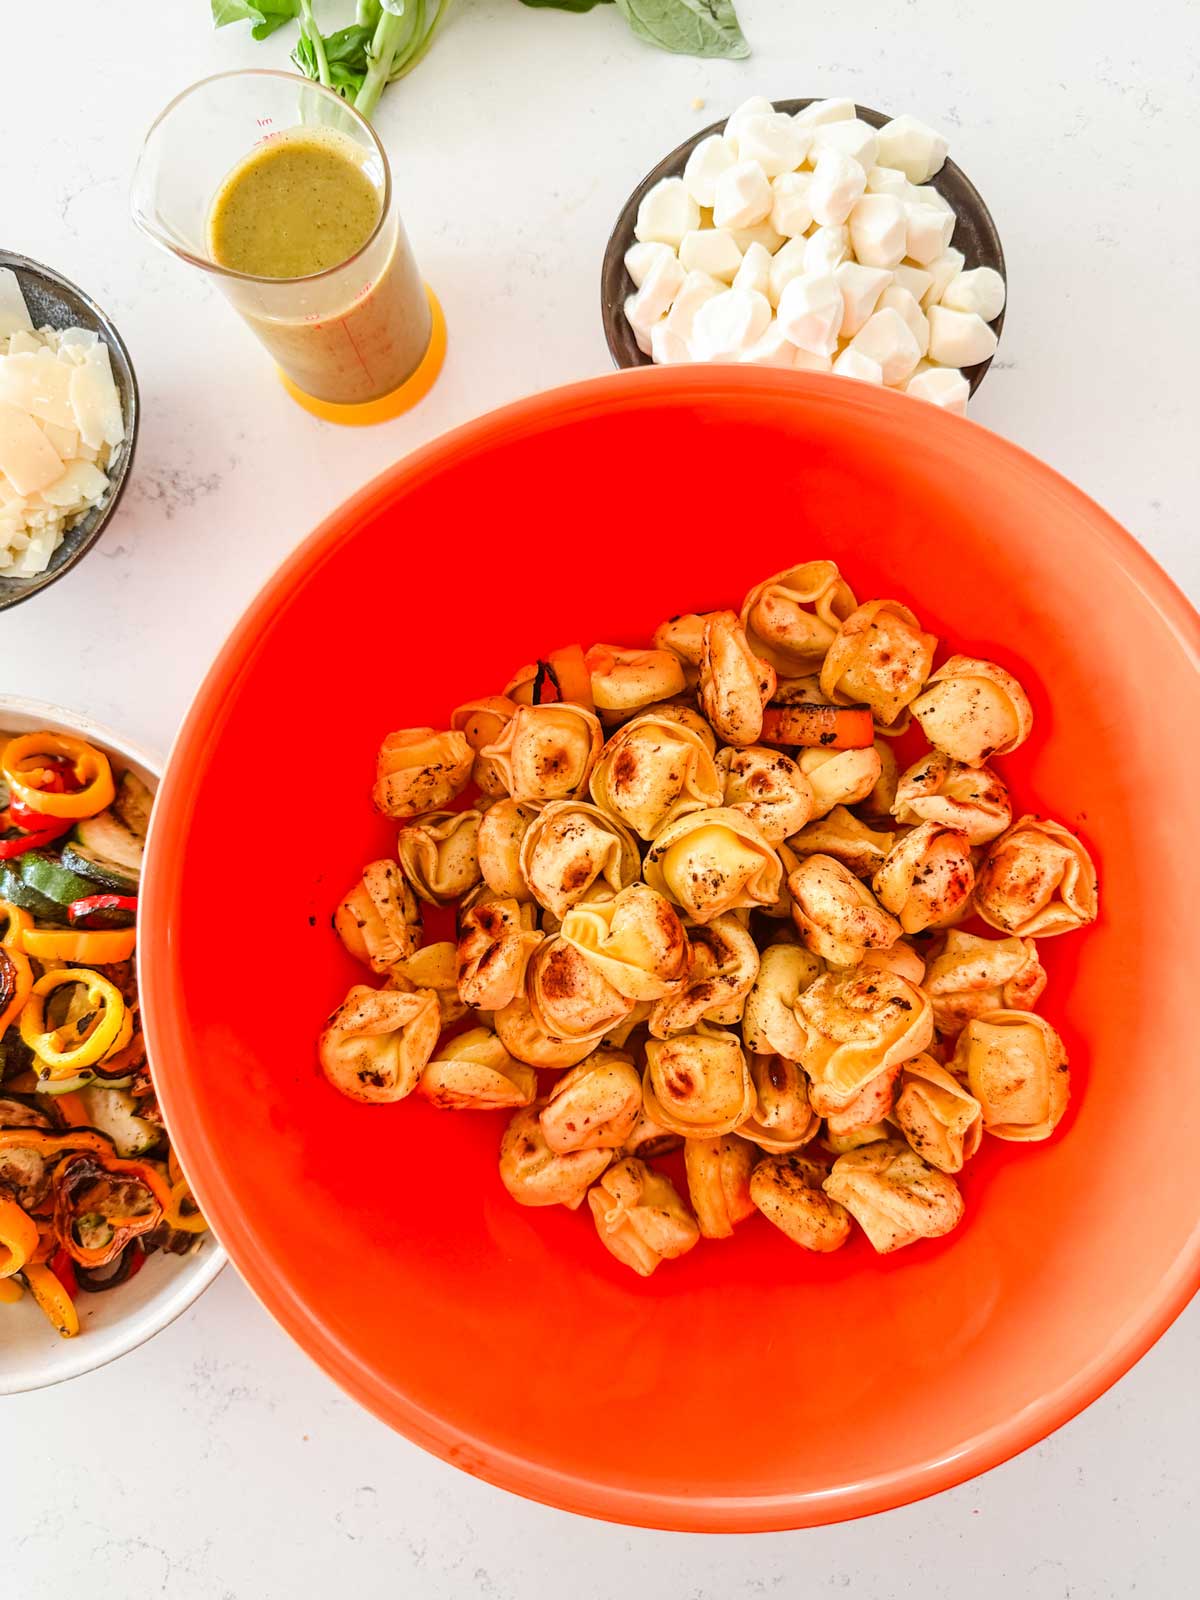 Overhead photo of a bowl of griddled tortellini and griddled vegetables.